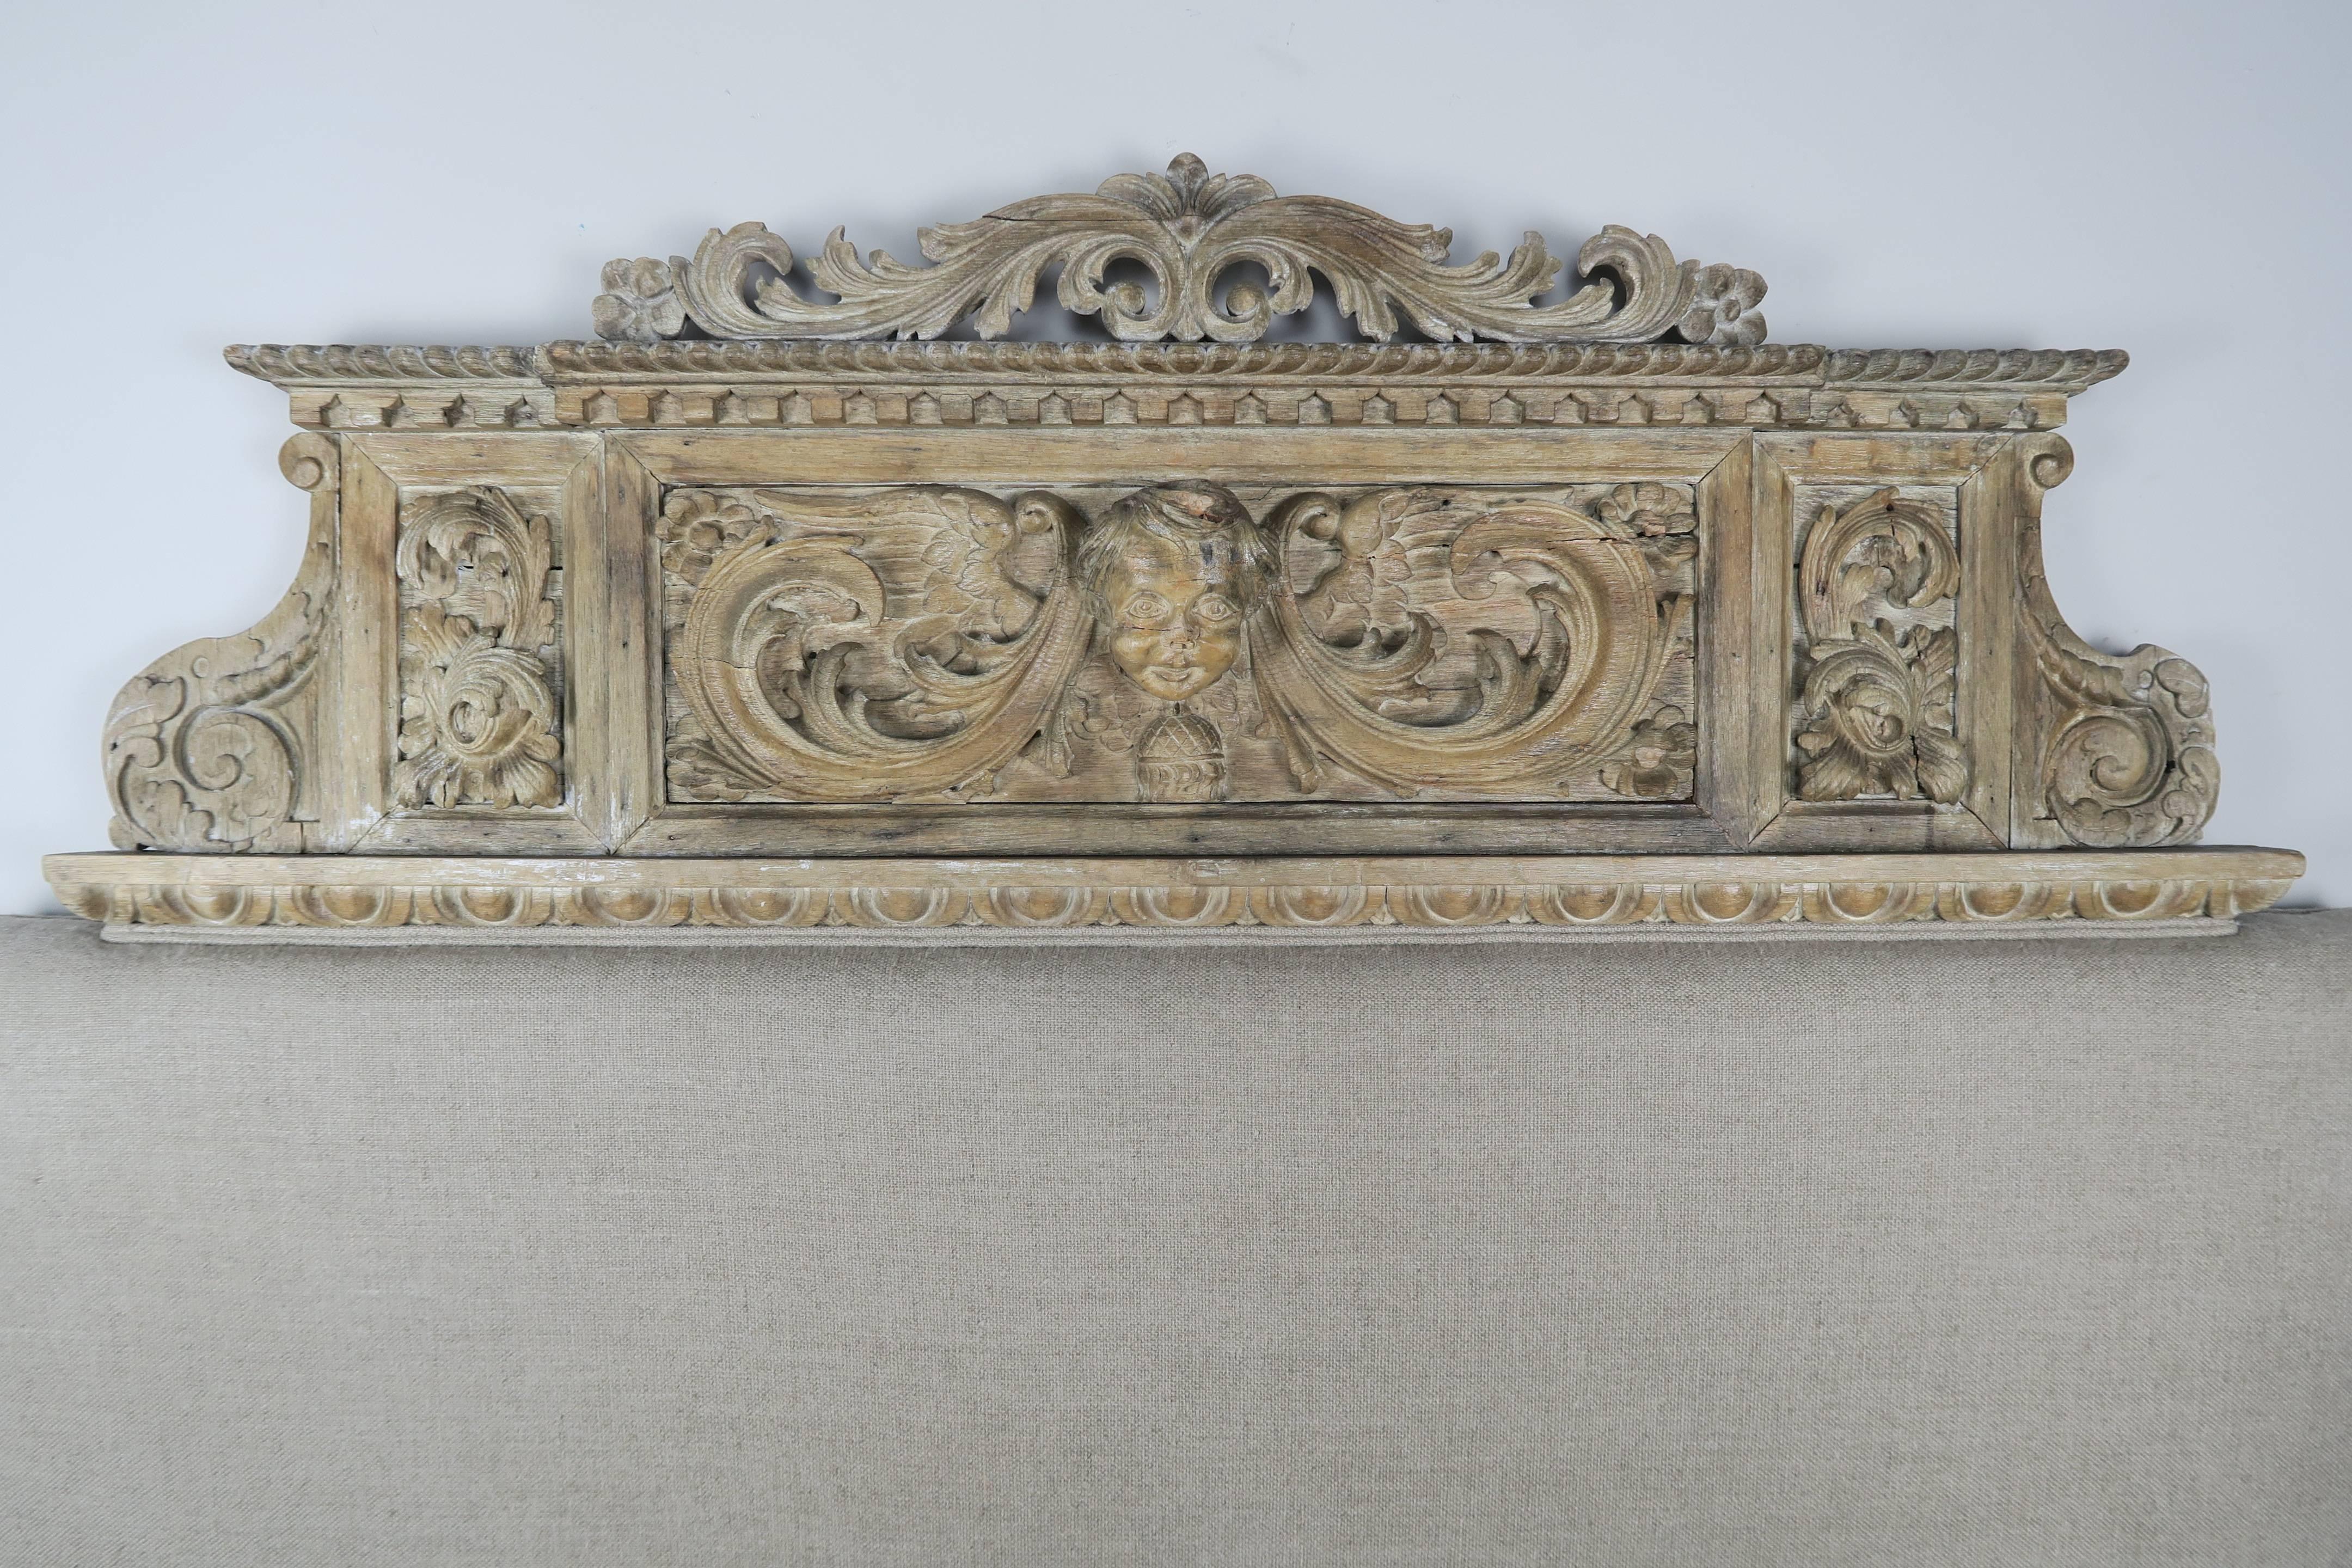 Queen-size washed Belgium linen headboard made with a 19th century carved wood panel depicting a cherub face surrounded by swirling acanthus leaves throughout. Egg and dart carved detail across the bottom of the panel. Additional carved details